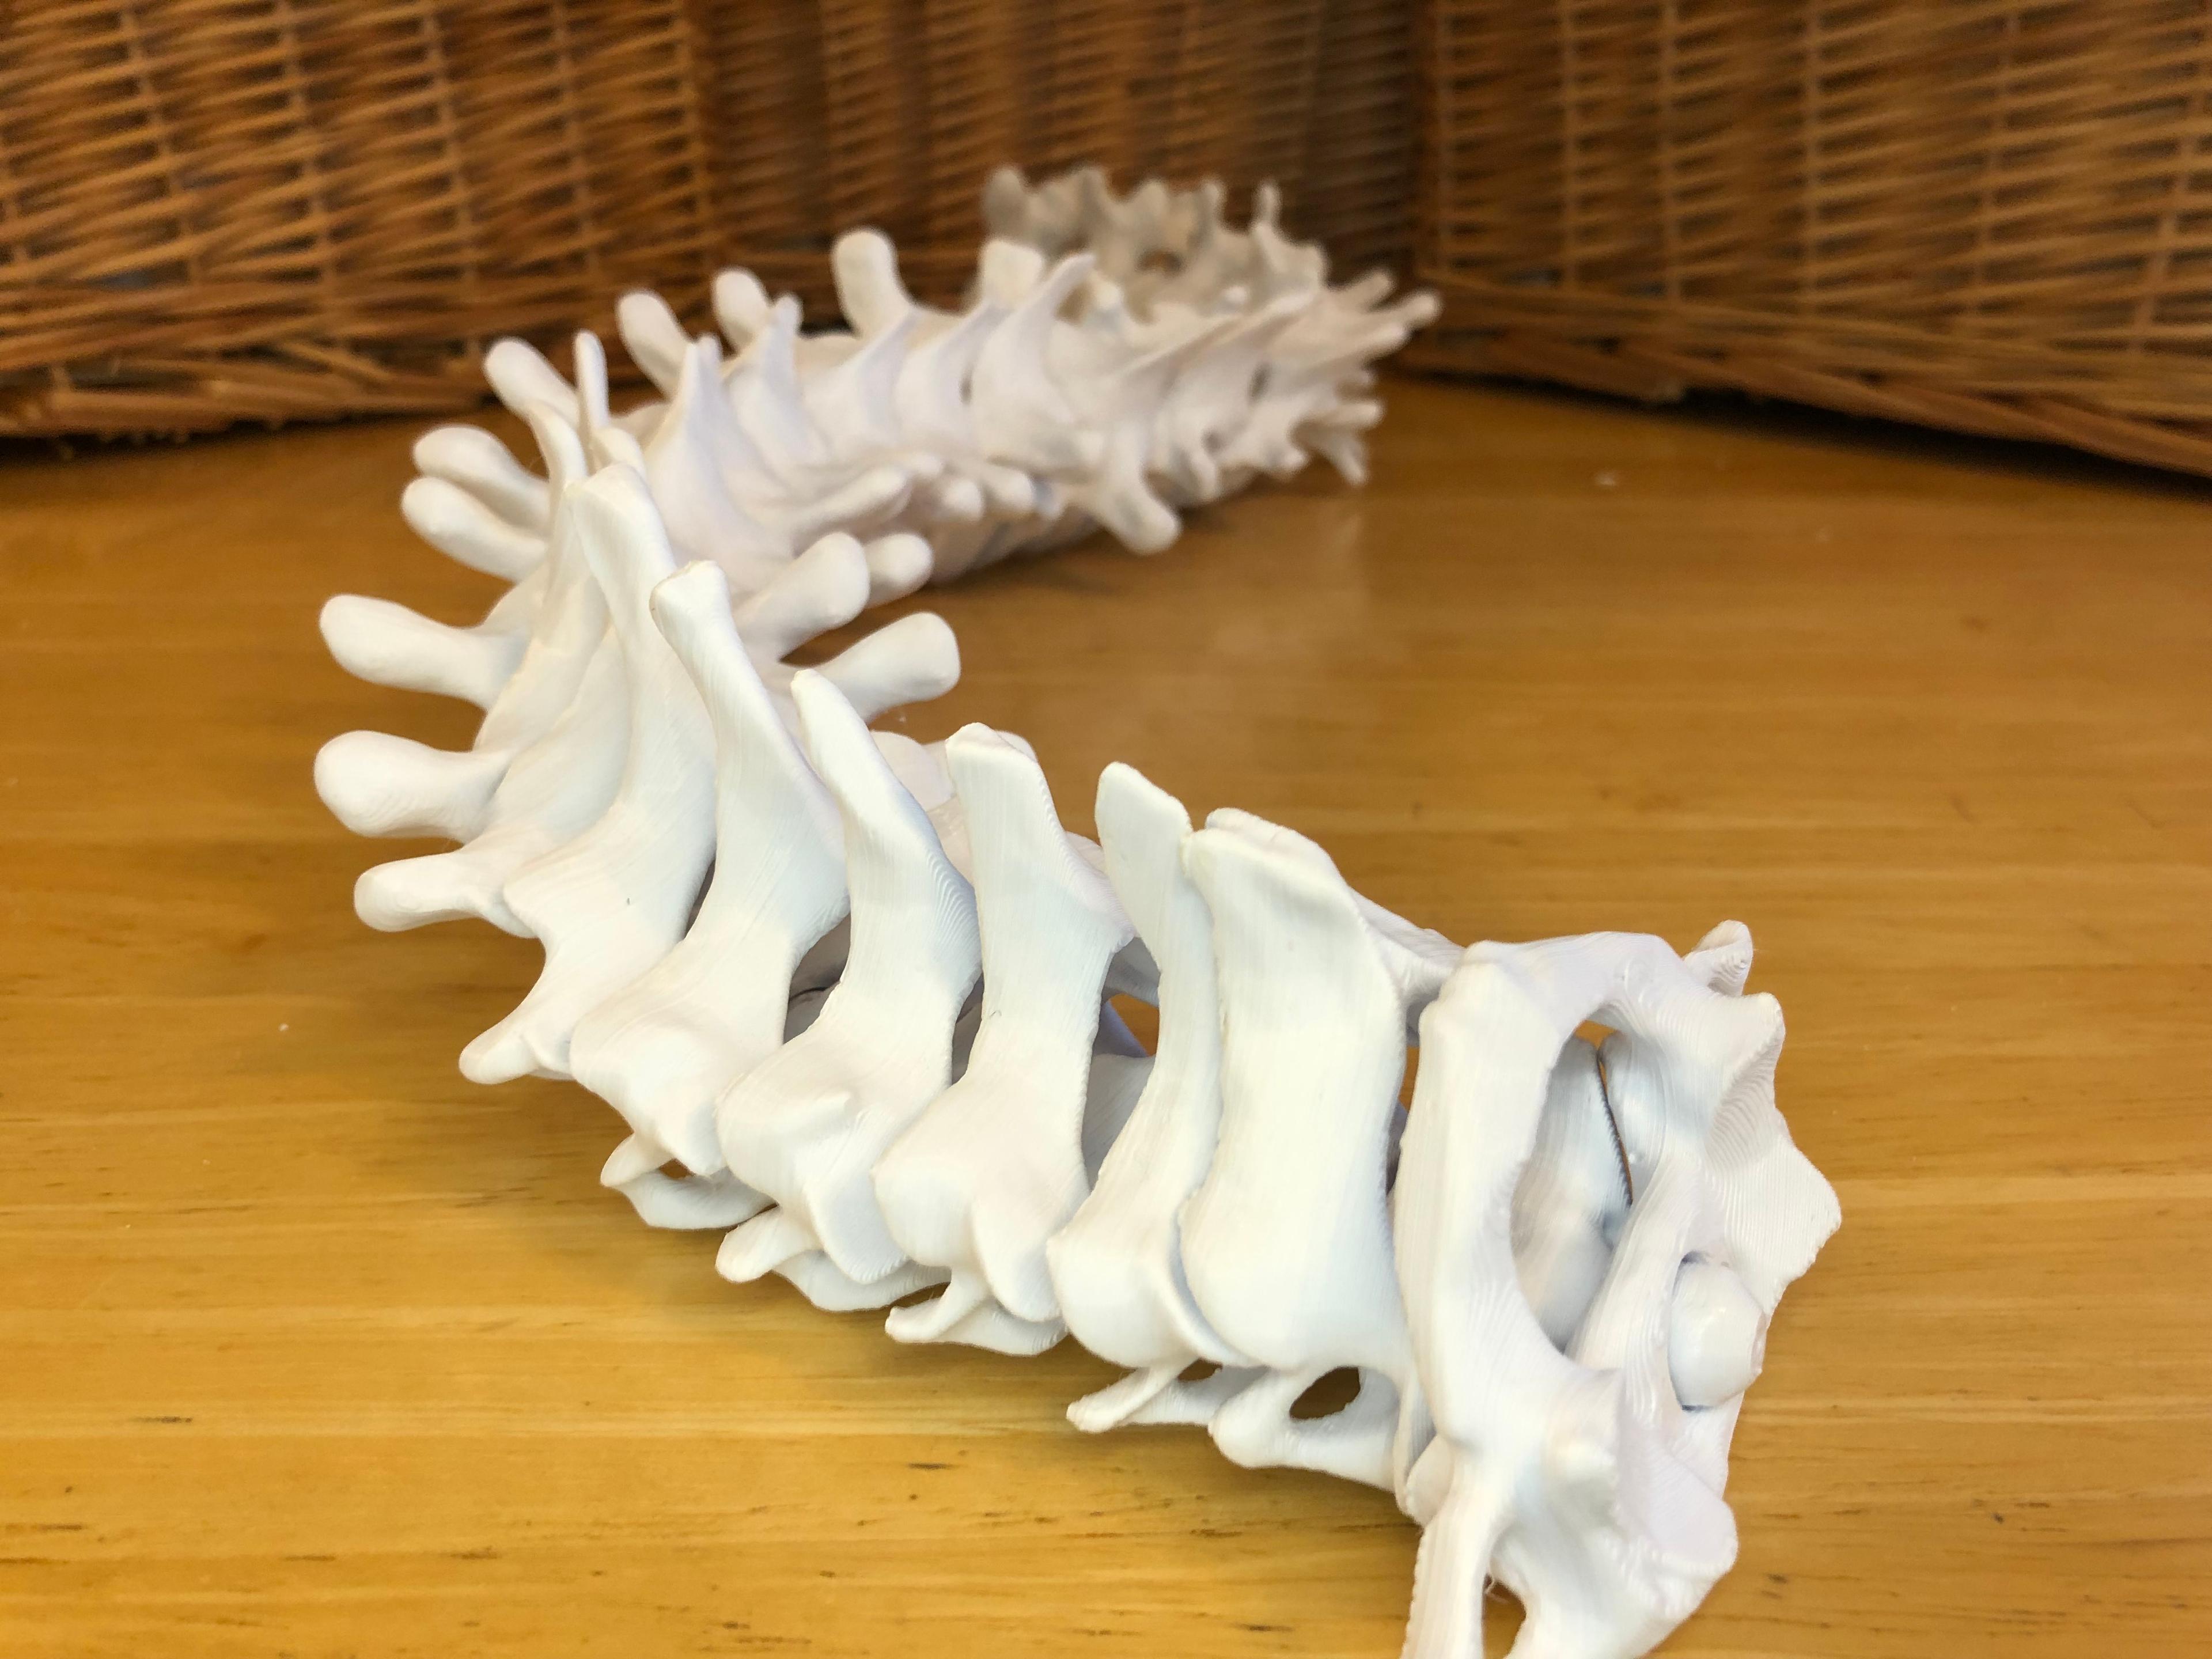 Full-sized Anatomically Correct Articulating Spine 3d model